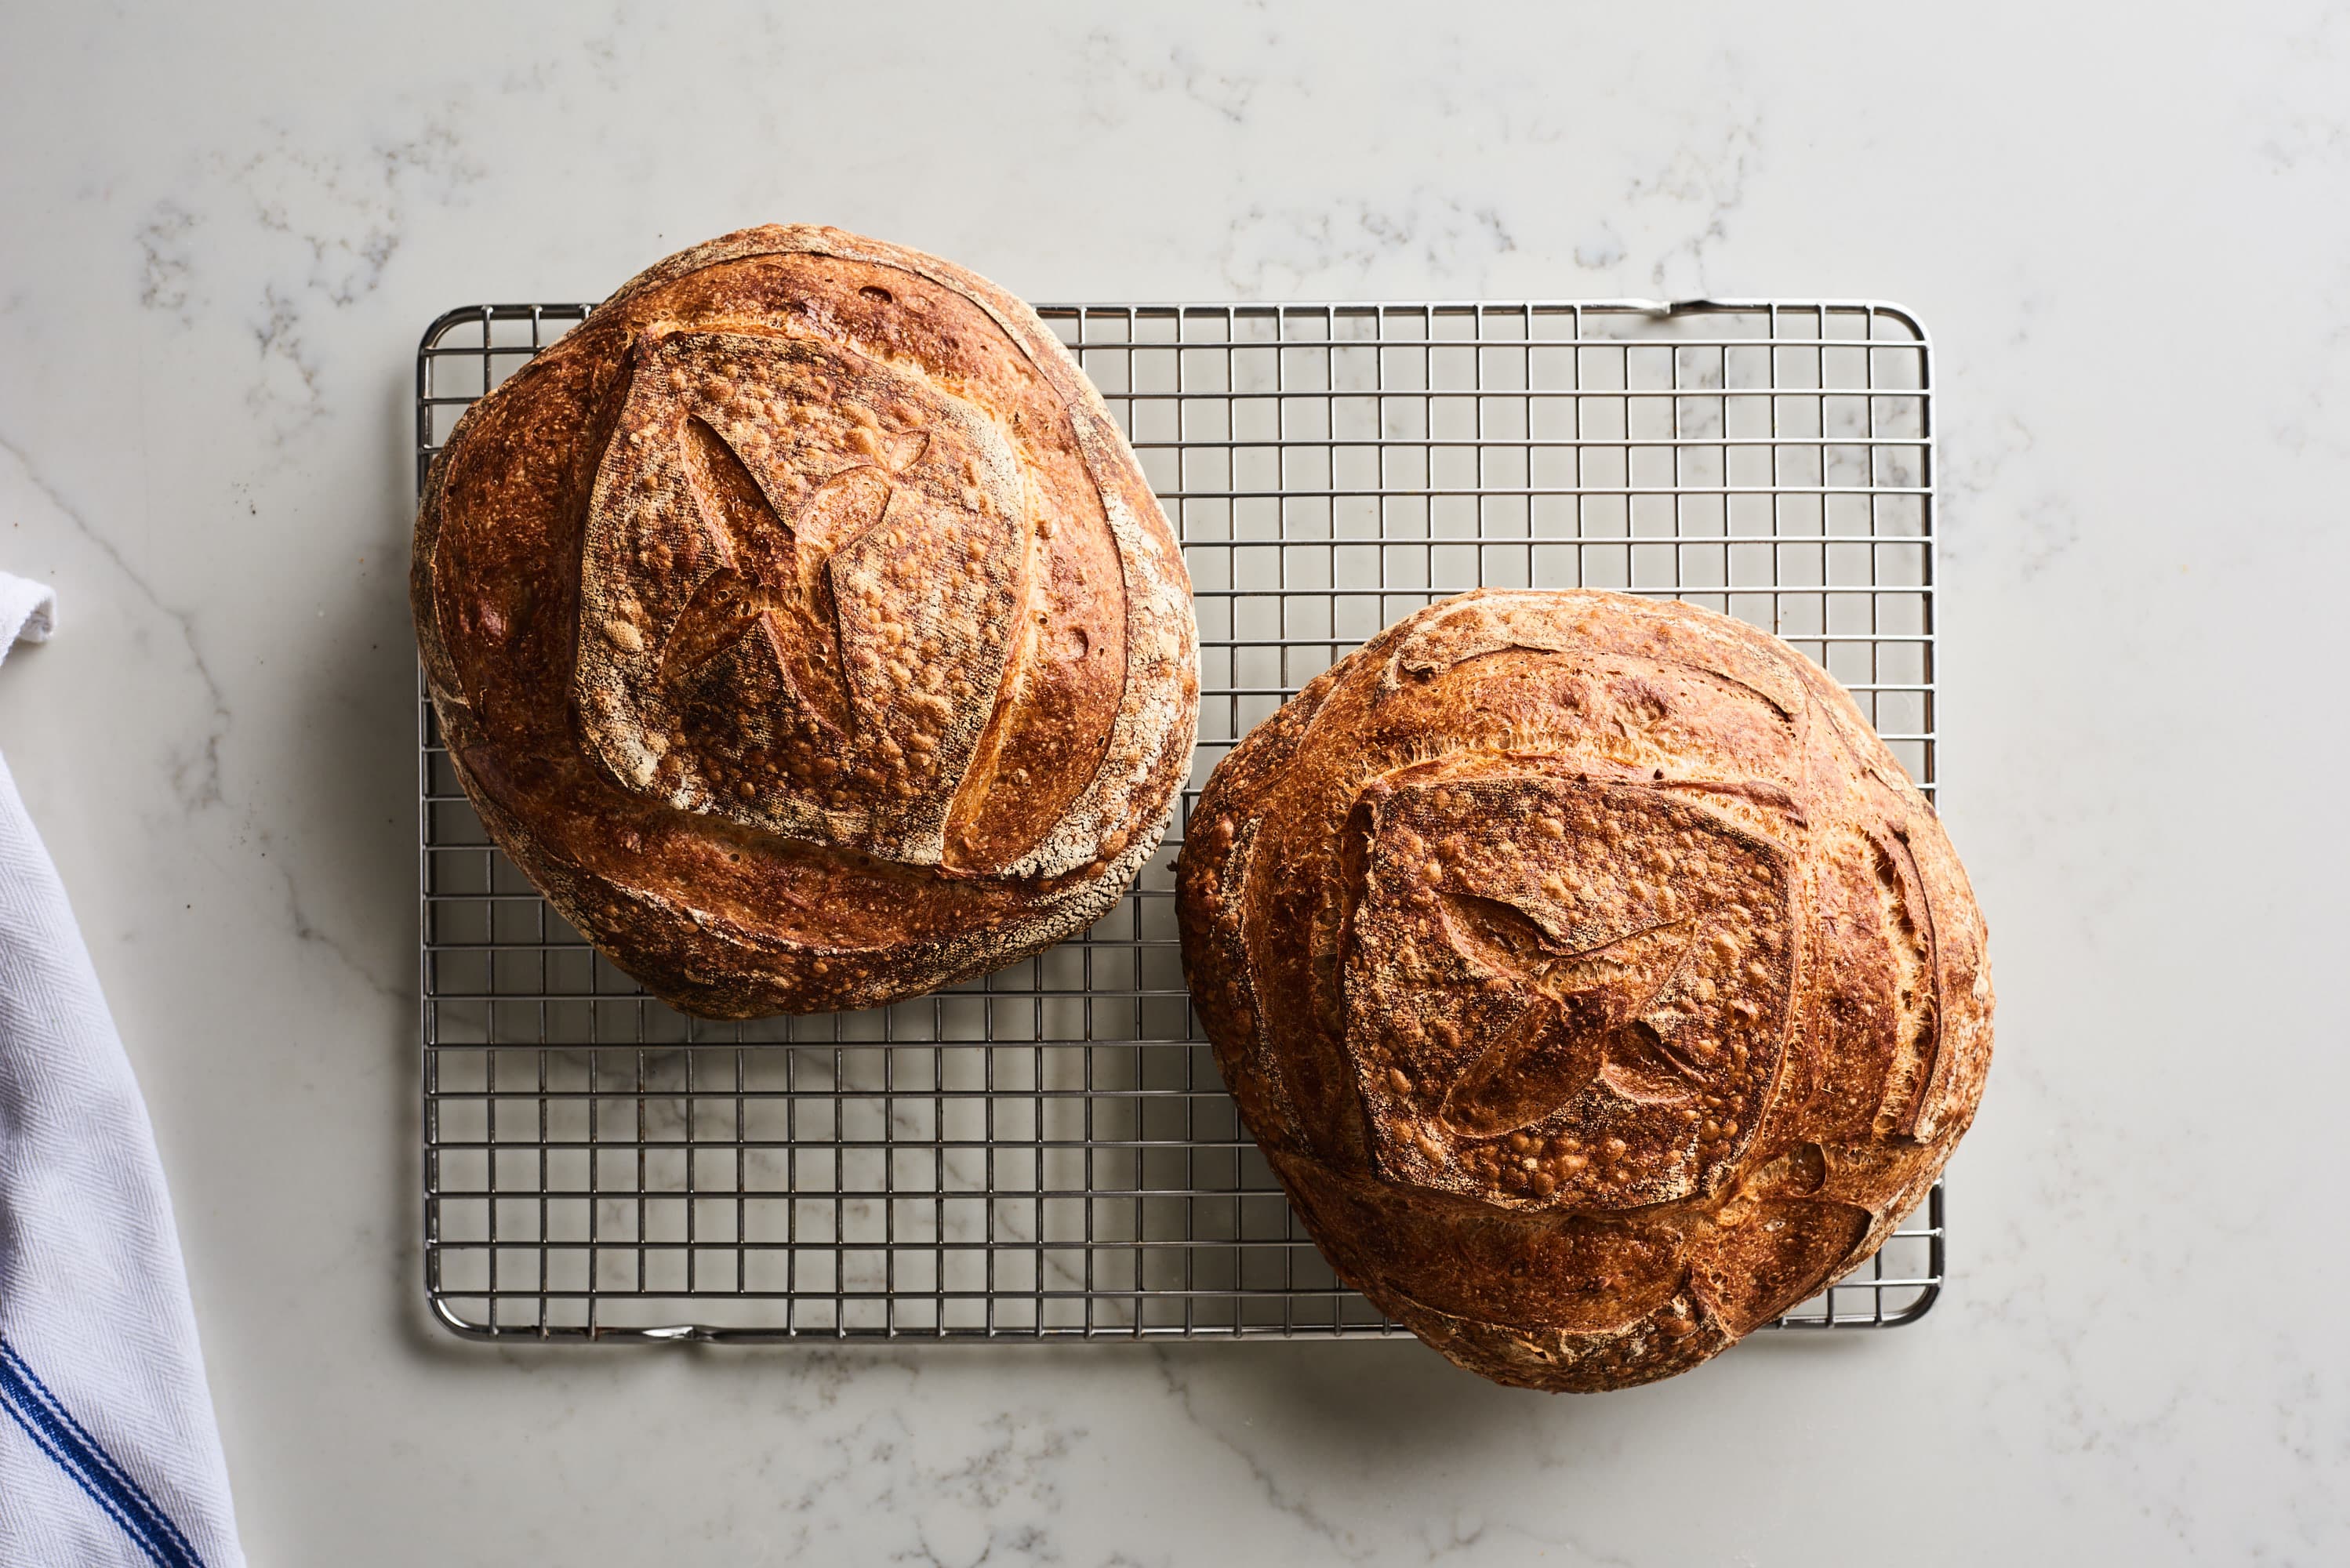 Le Creuset's New Bread Oven Achieves a Perfectly Crusty Loaf -  Williams-Sonoma Taste